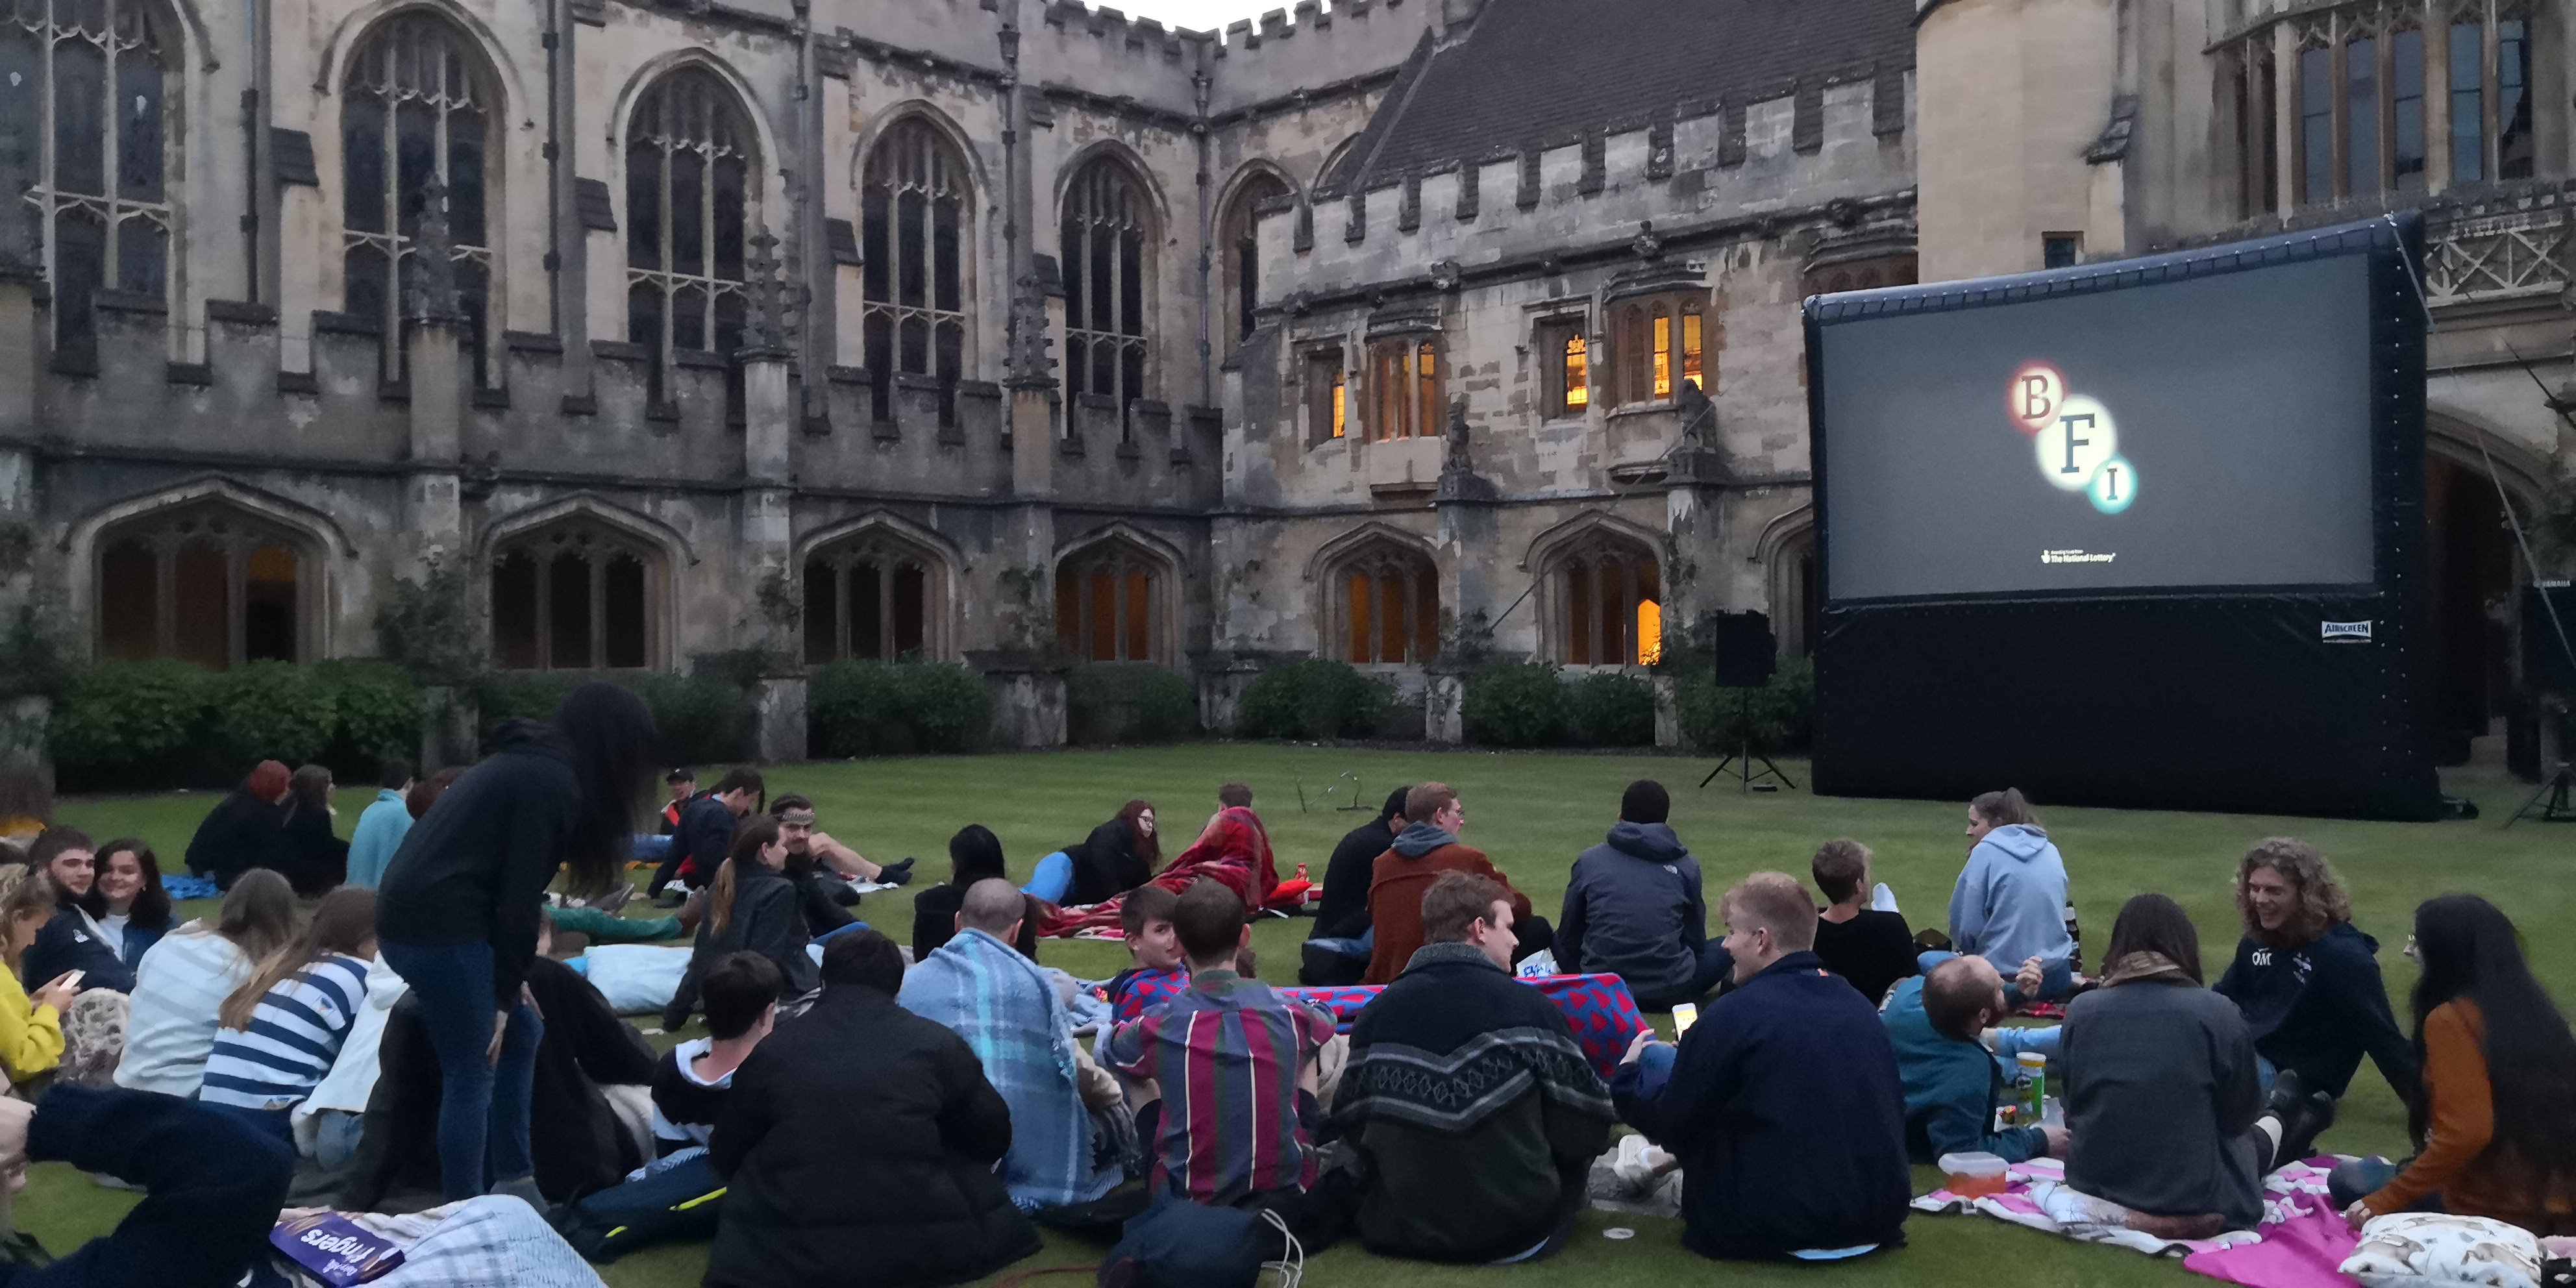 How to Setting up an outdoor cinema?